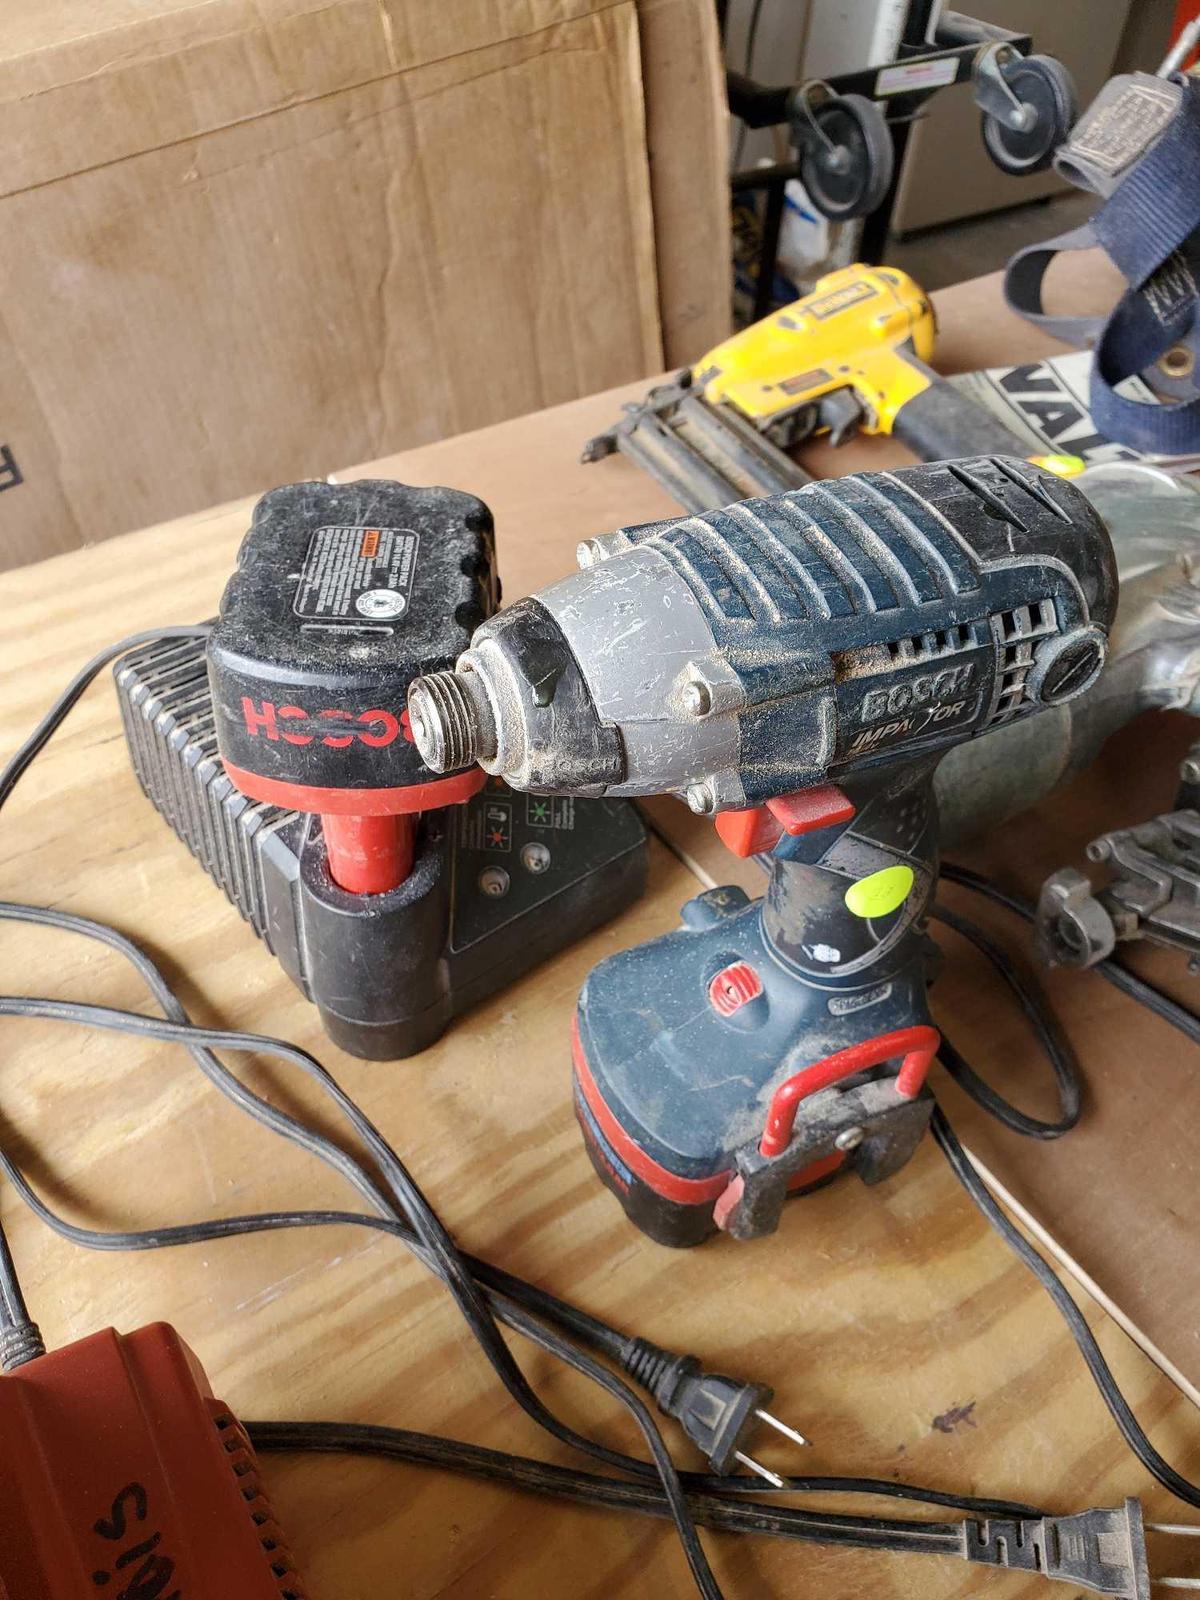 BOSCH IMPACTOR 23614 IMPACT DRILL, COMES WITH 2 BATTERIES AND A CHARGER, PLEASE SEE THE PICTURES FOR